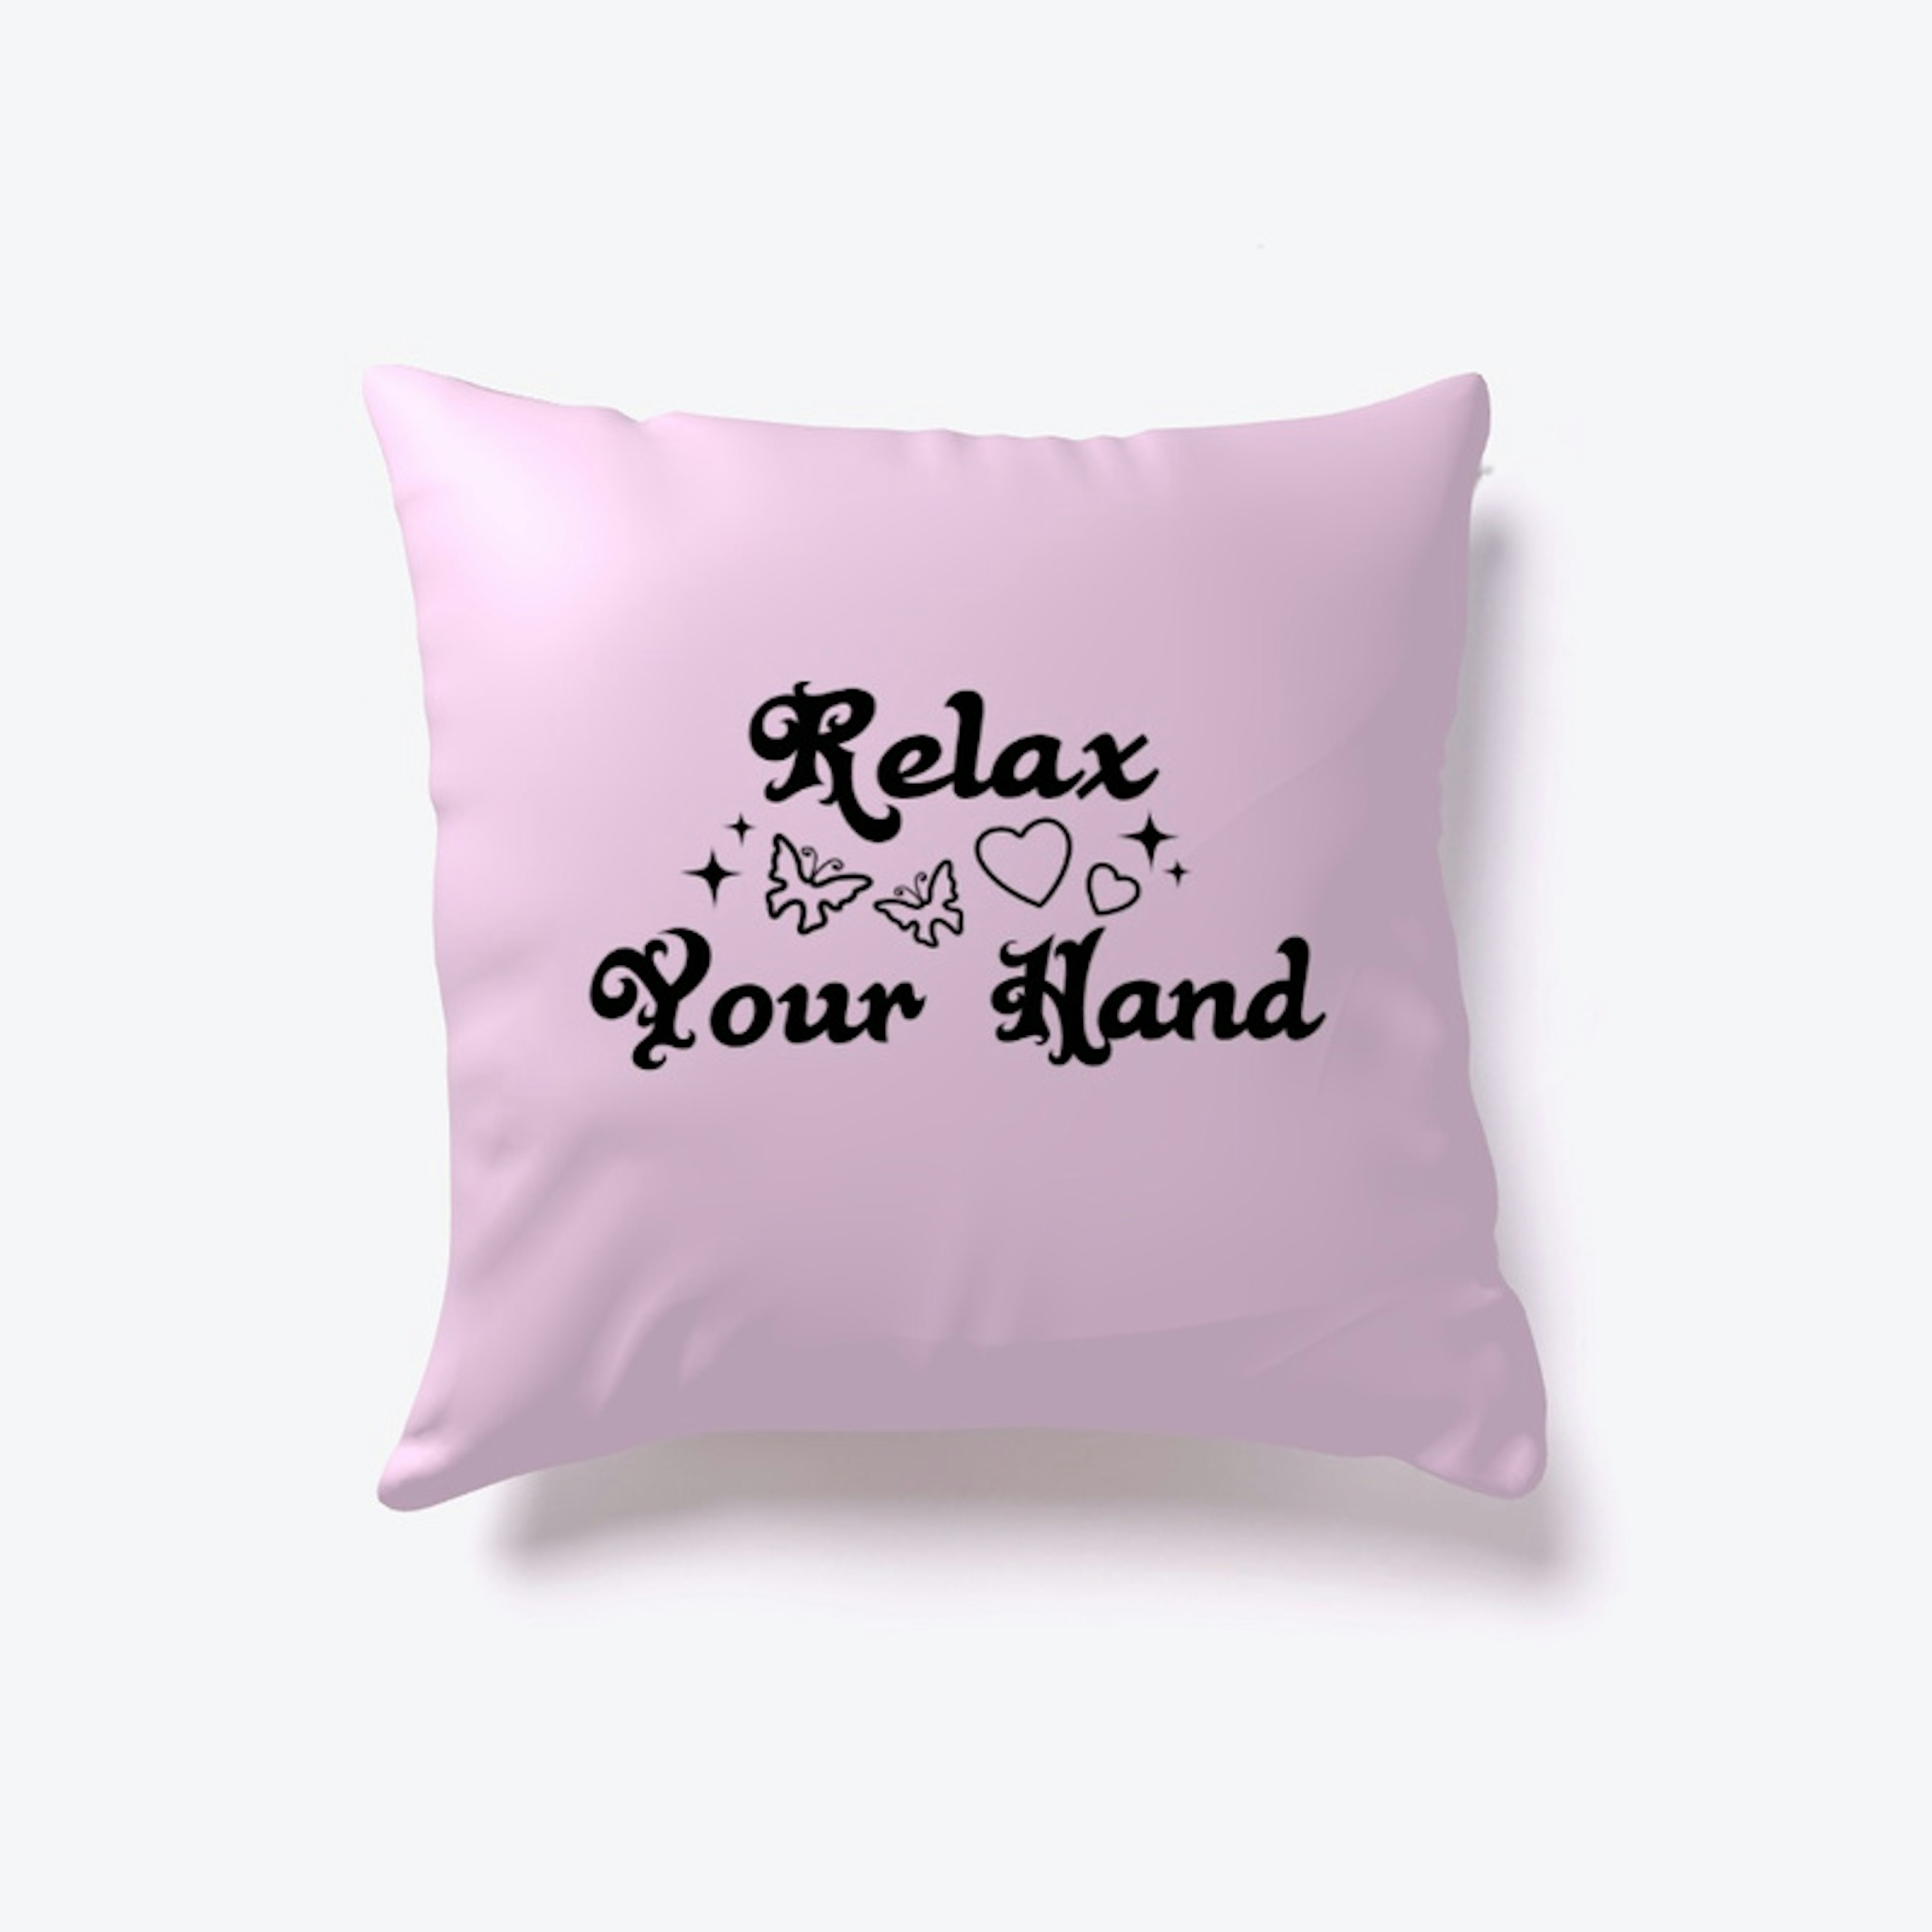 Relax Your Hand